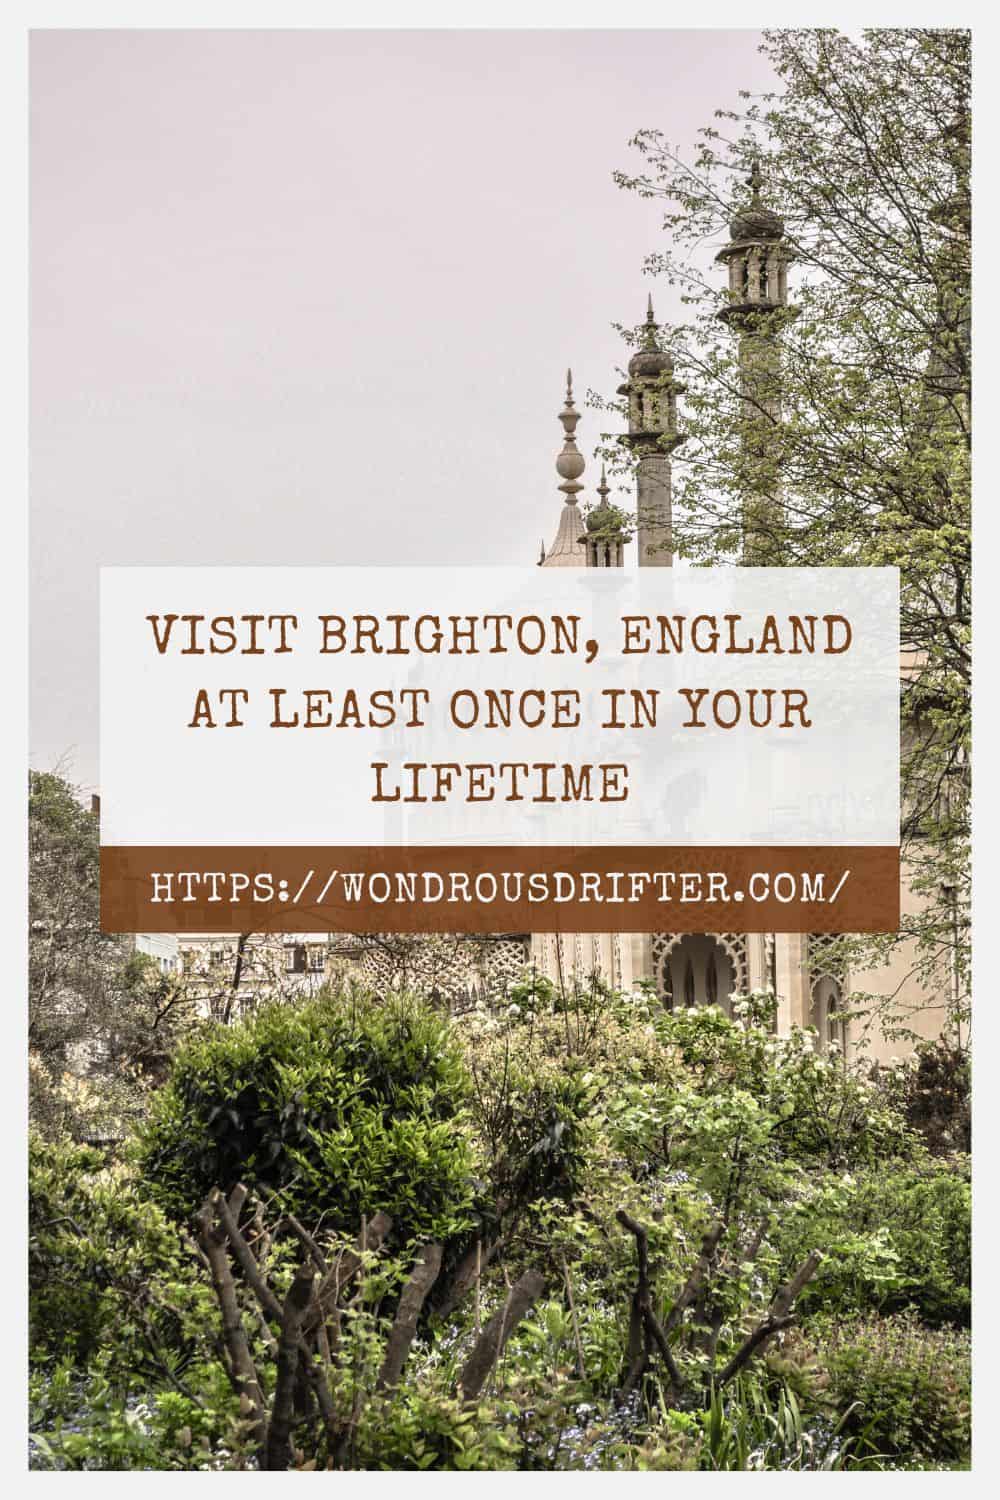 Visit Brighton England at least once in your lifetime